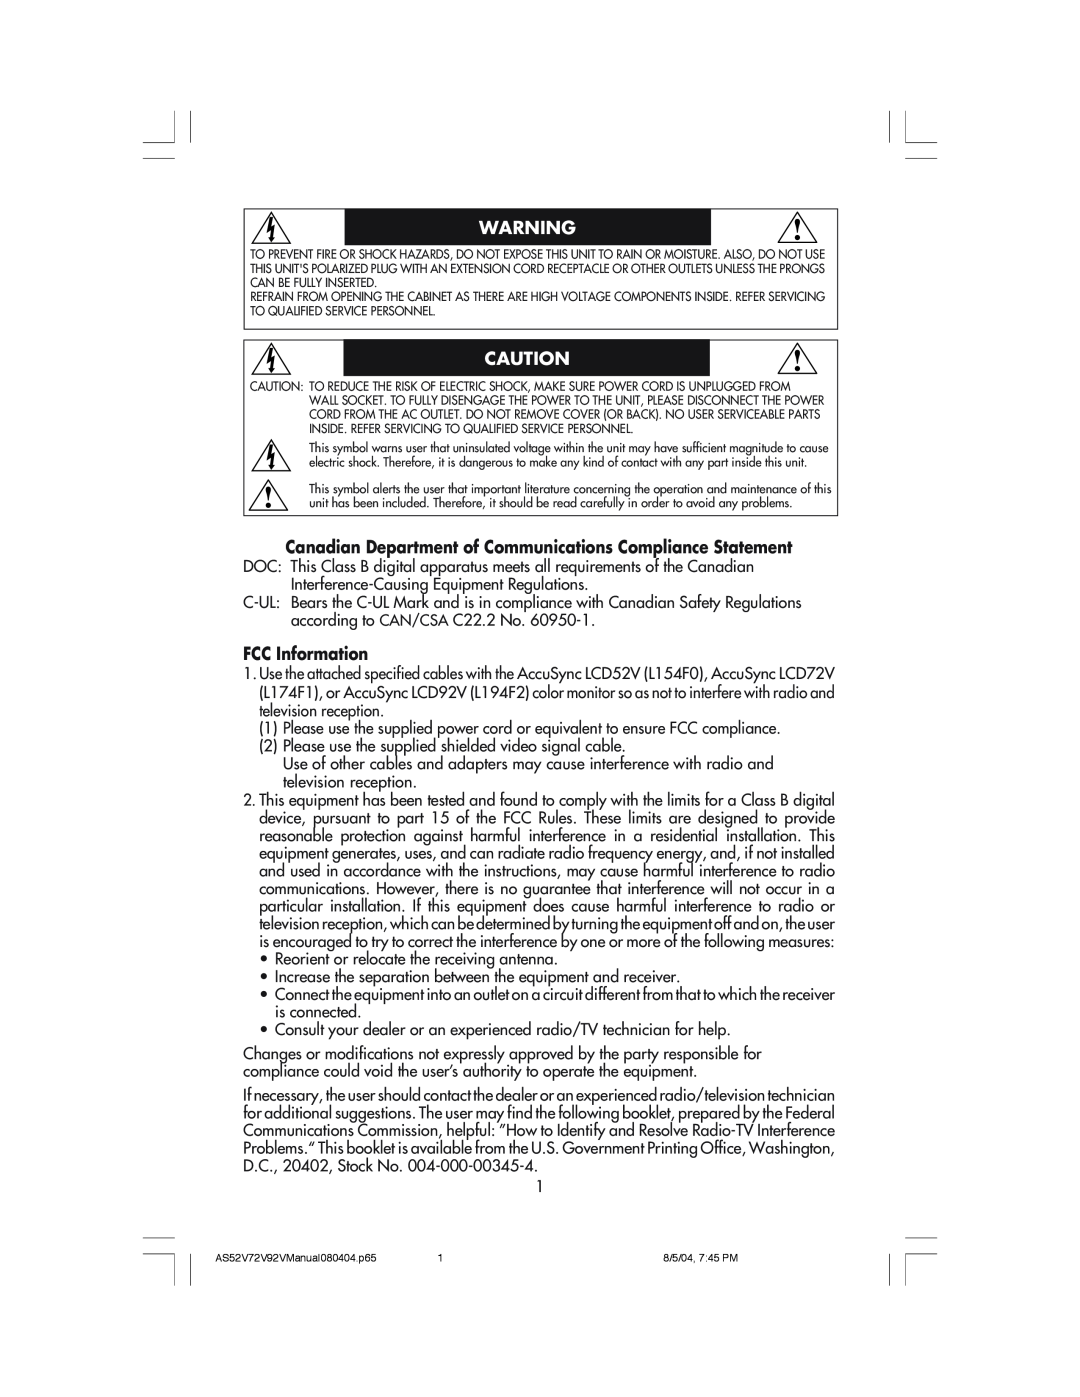 NEC LCD52V, LCD72V manual Canadian Department of Communications Compliance Statement, FCC Information 